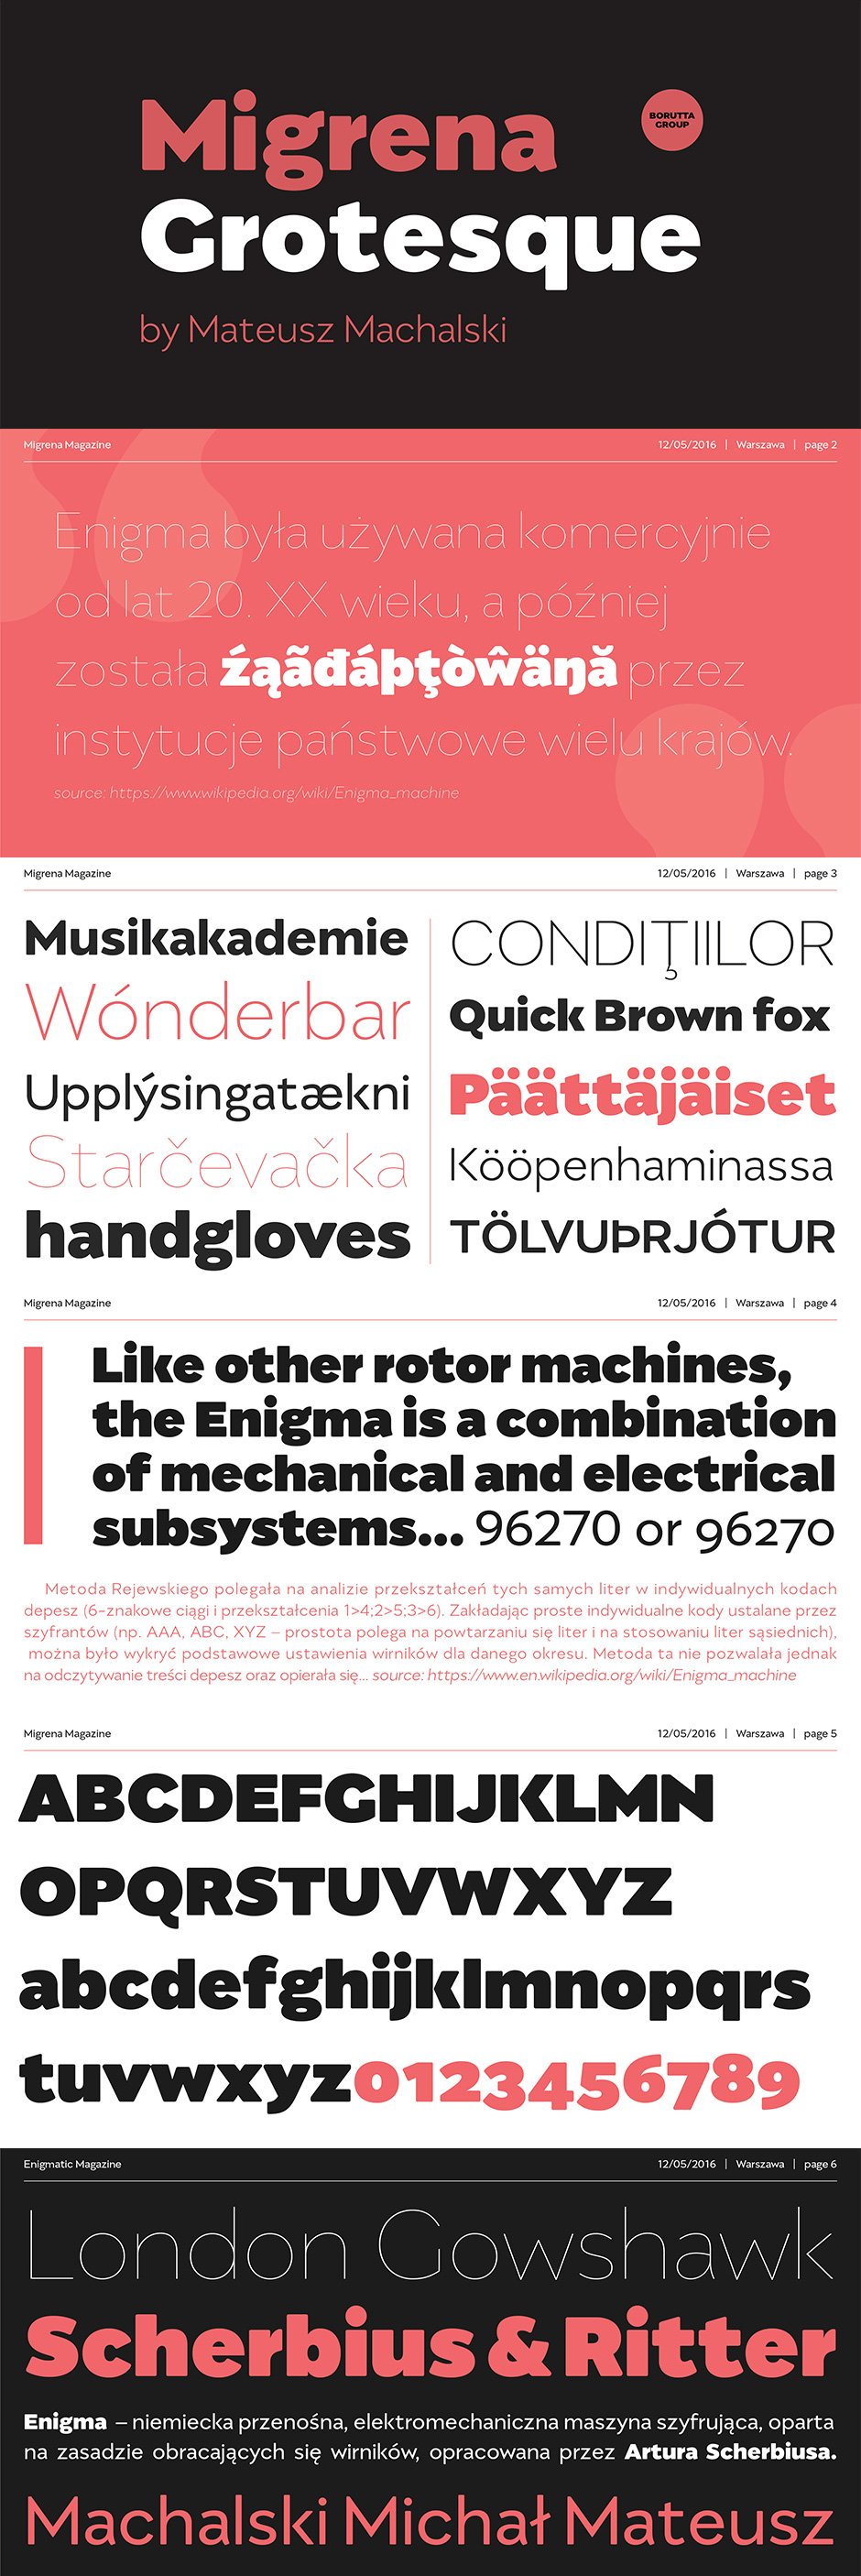 The Type Lover’s Bundle